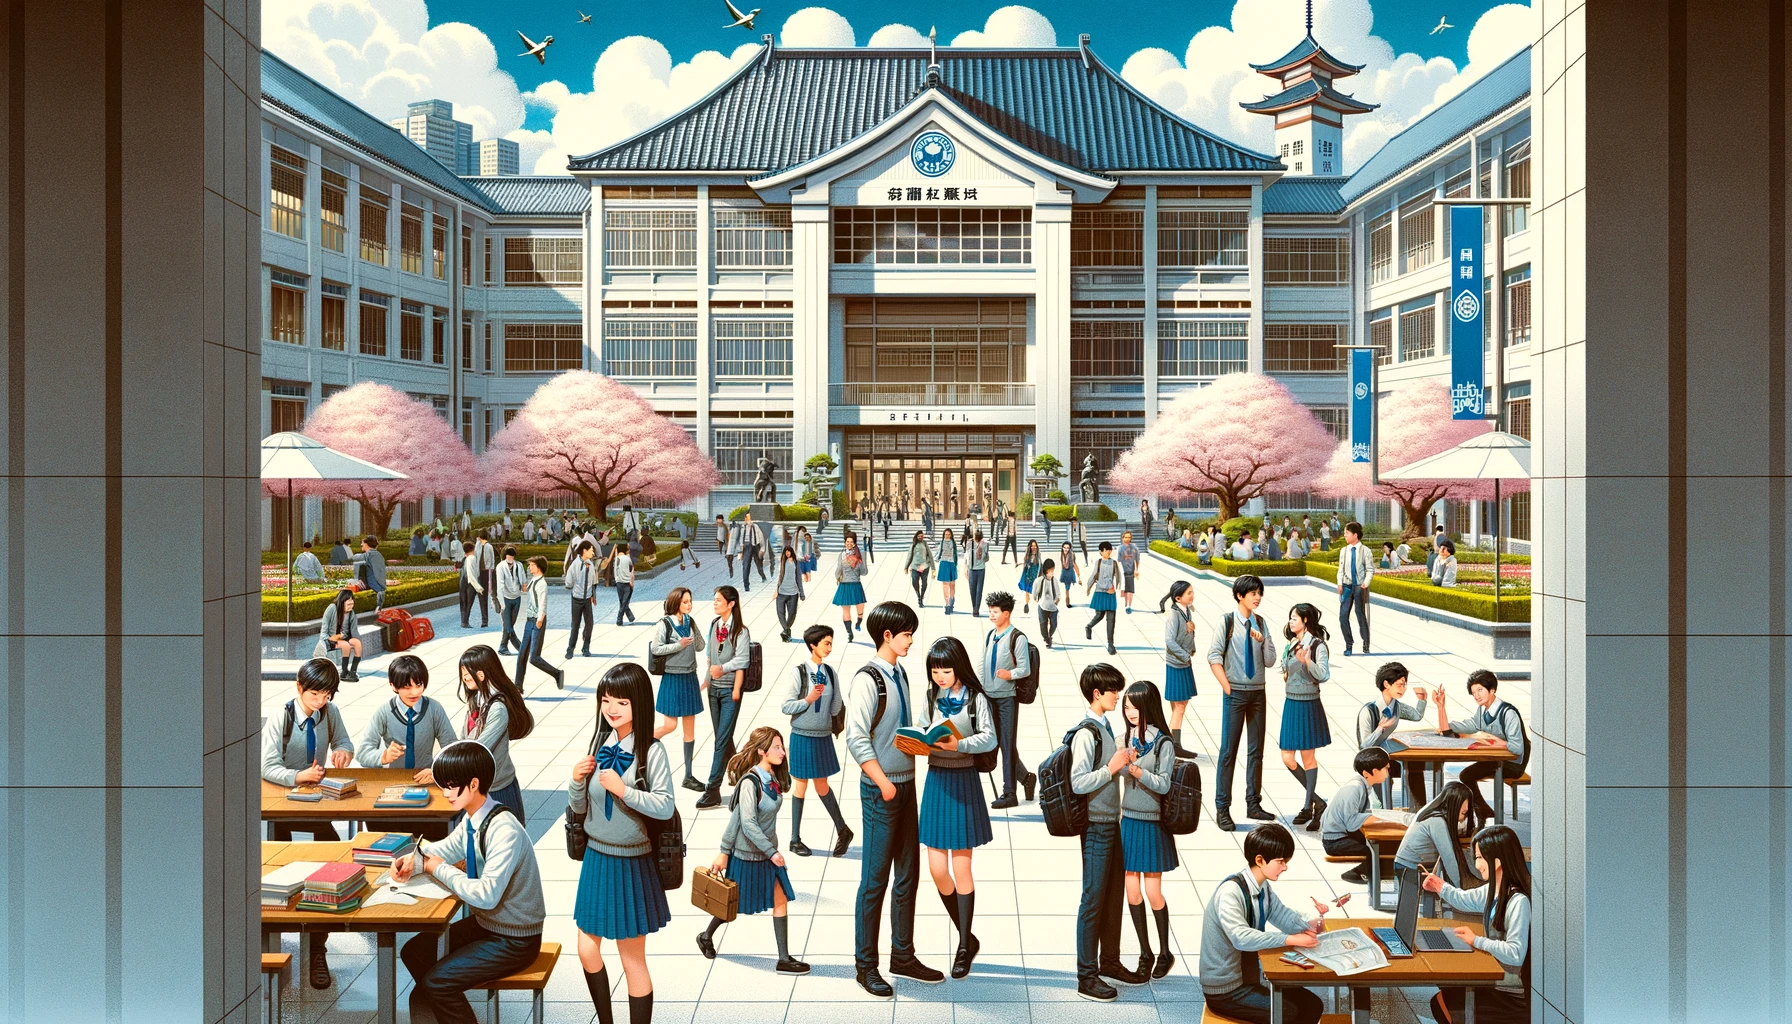 A lively high school campus scene illustrating the popularity of Meiji High School in Japan. The image features a diverse group of students of various Asian descents, in school uniforms, engaged in various activities. Students are seen chatting, studying, and participating in sports on a well-maintained campus with modern and traditional architectural elements. There are cherry trees in bloom, adding a picturesque quality to the setting. The atmosphere is vibrant and energetic, capturing the essence of a bustling and popular educational institution.